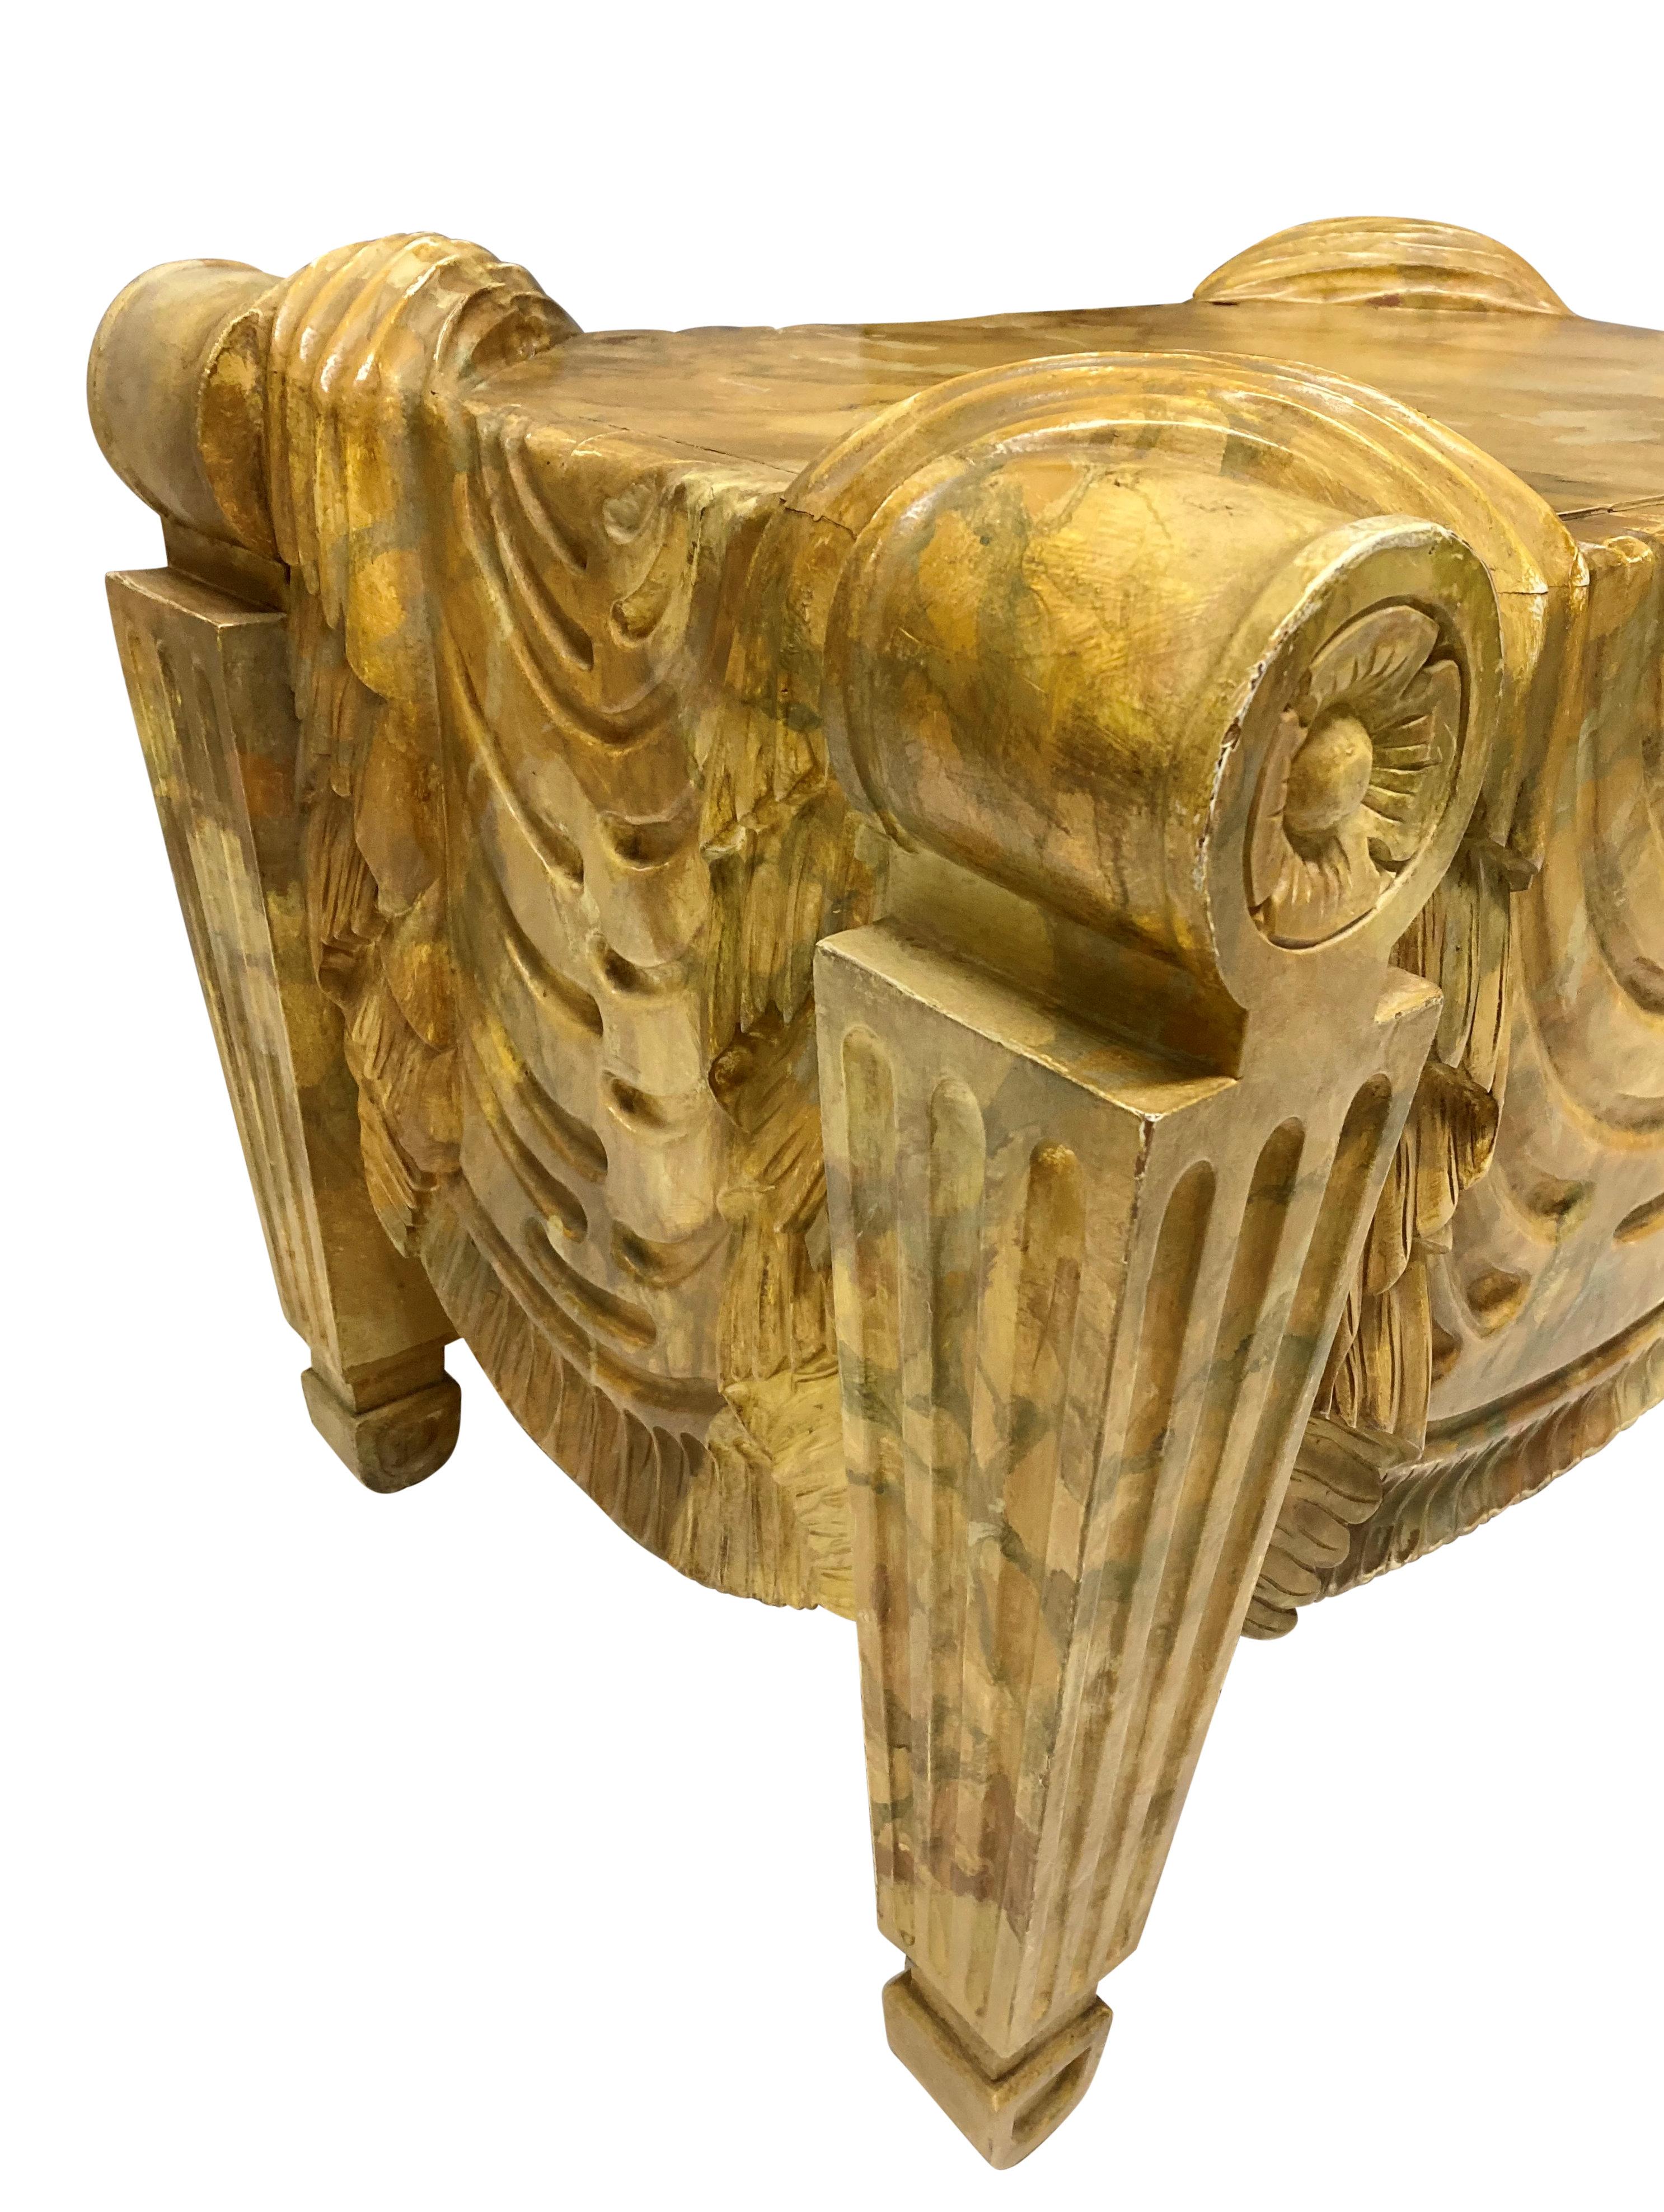 A finely carved and faux Sienna marble mahogany stool after Charles Heathcote Tatham. Of good weight and solid construction.

The design is derived from C. H. Tatham's Etchings Representing the Best Examples of Ancient Ornamental Architecture Drawn